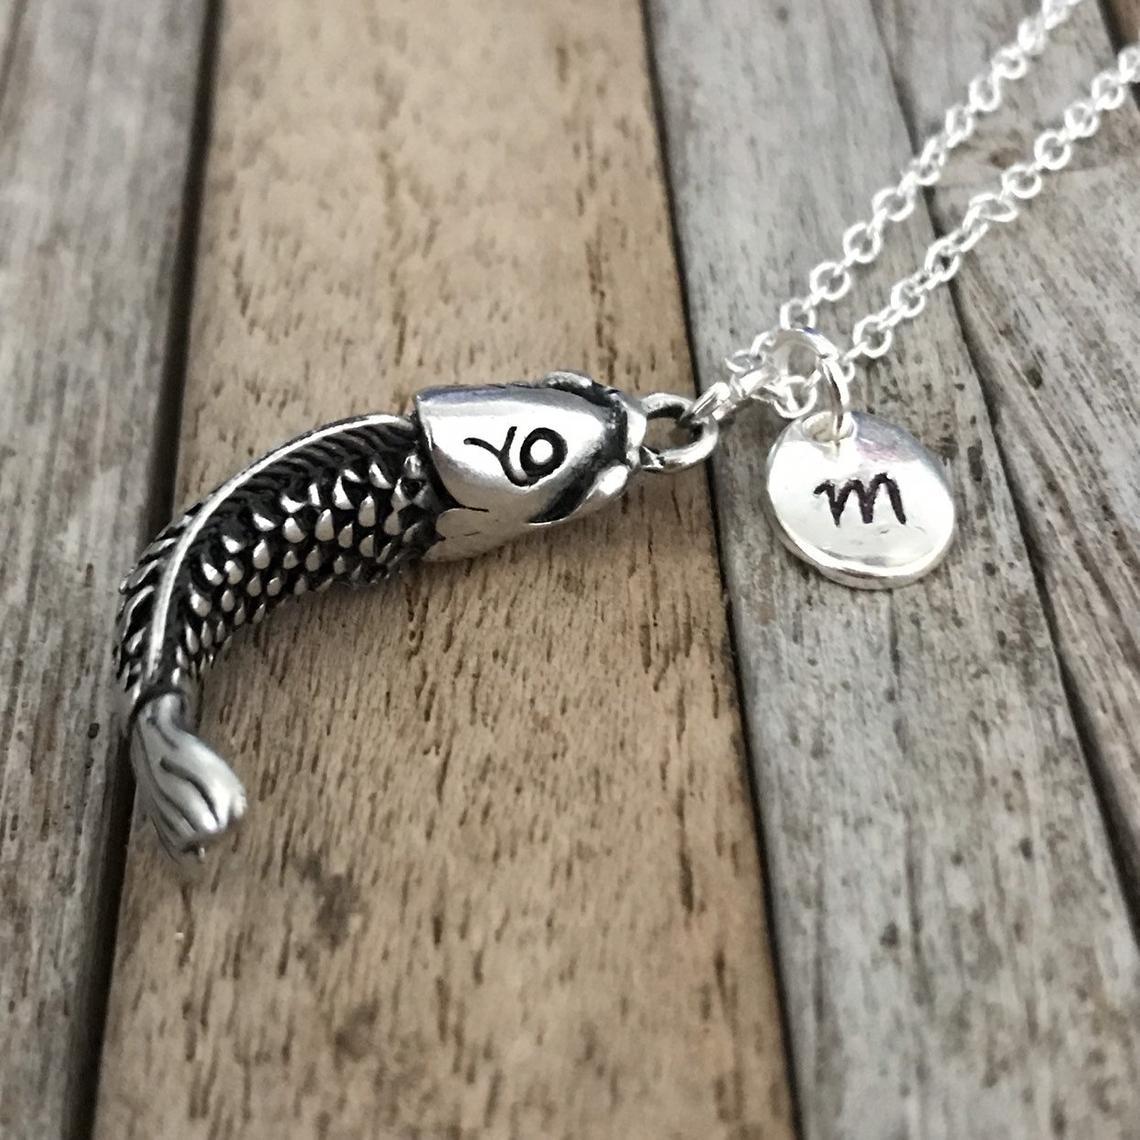 Customized fish necklace, Fish jewelry, Silver fish charm with Initial, Fisherman or woman gift